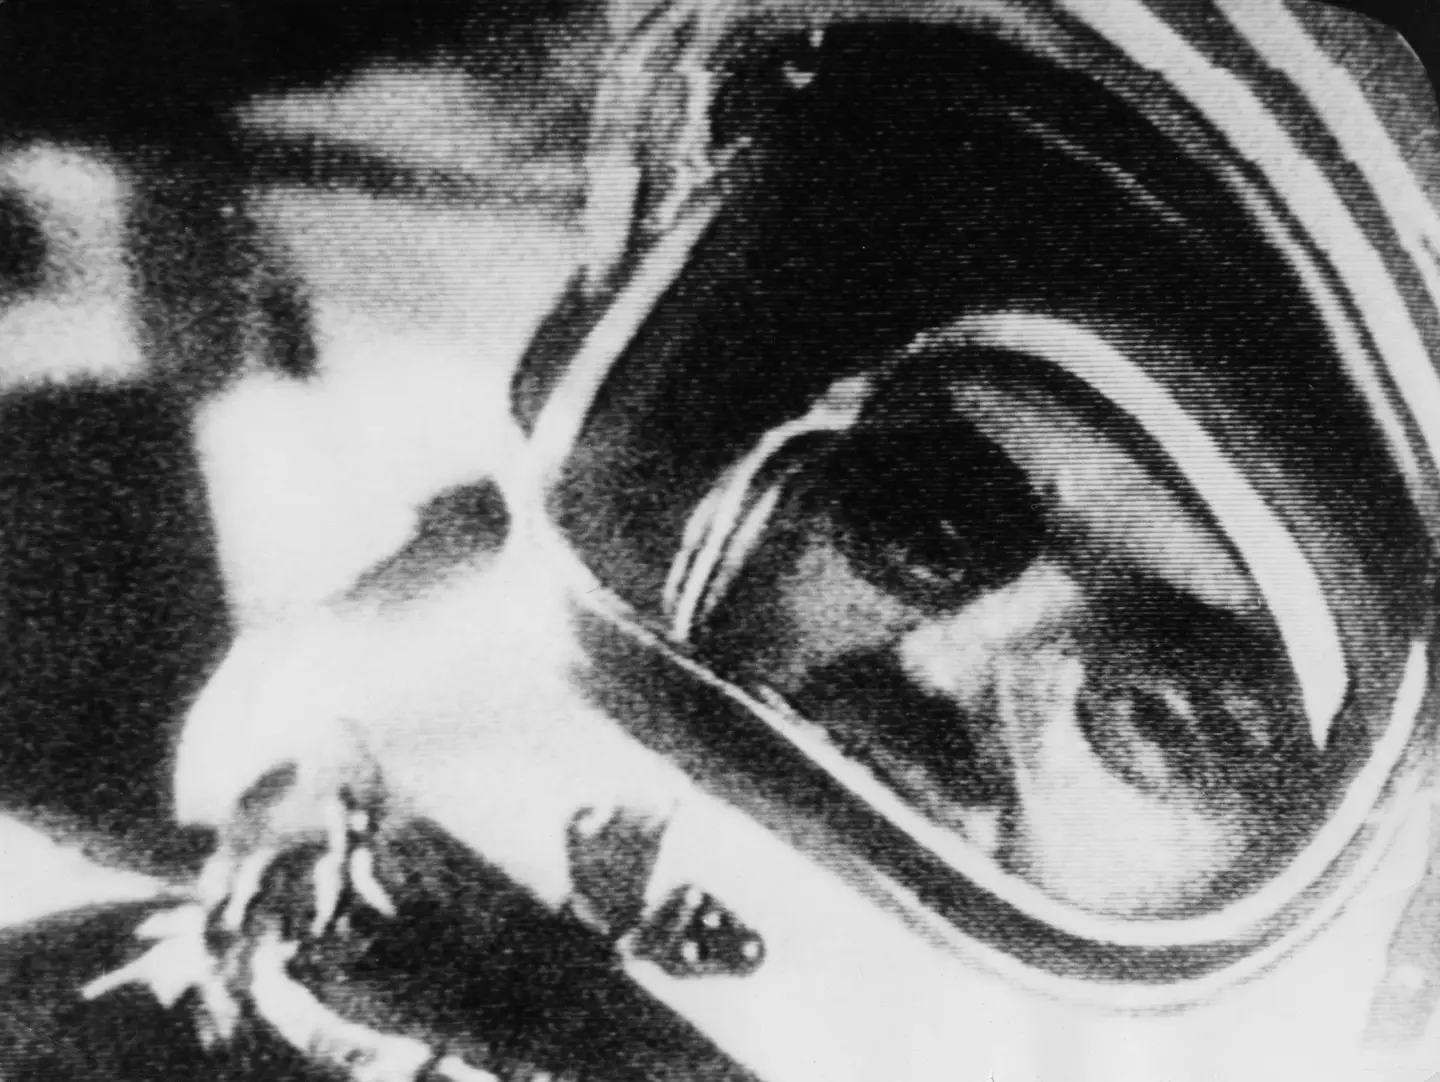 Komarov was known as 'the man who fell to Earth'.